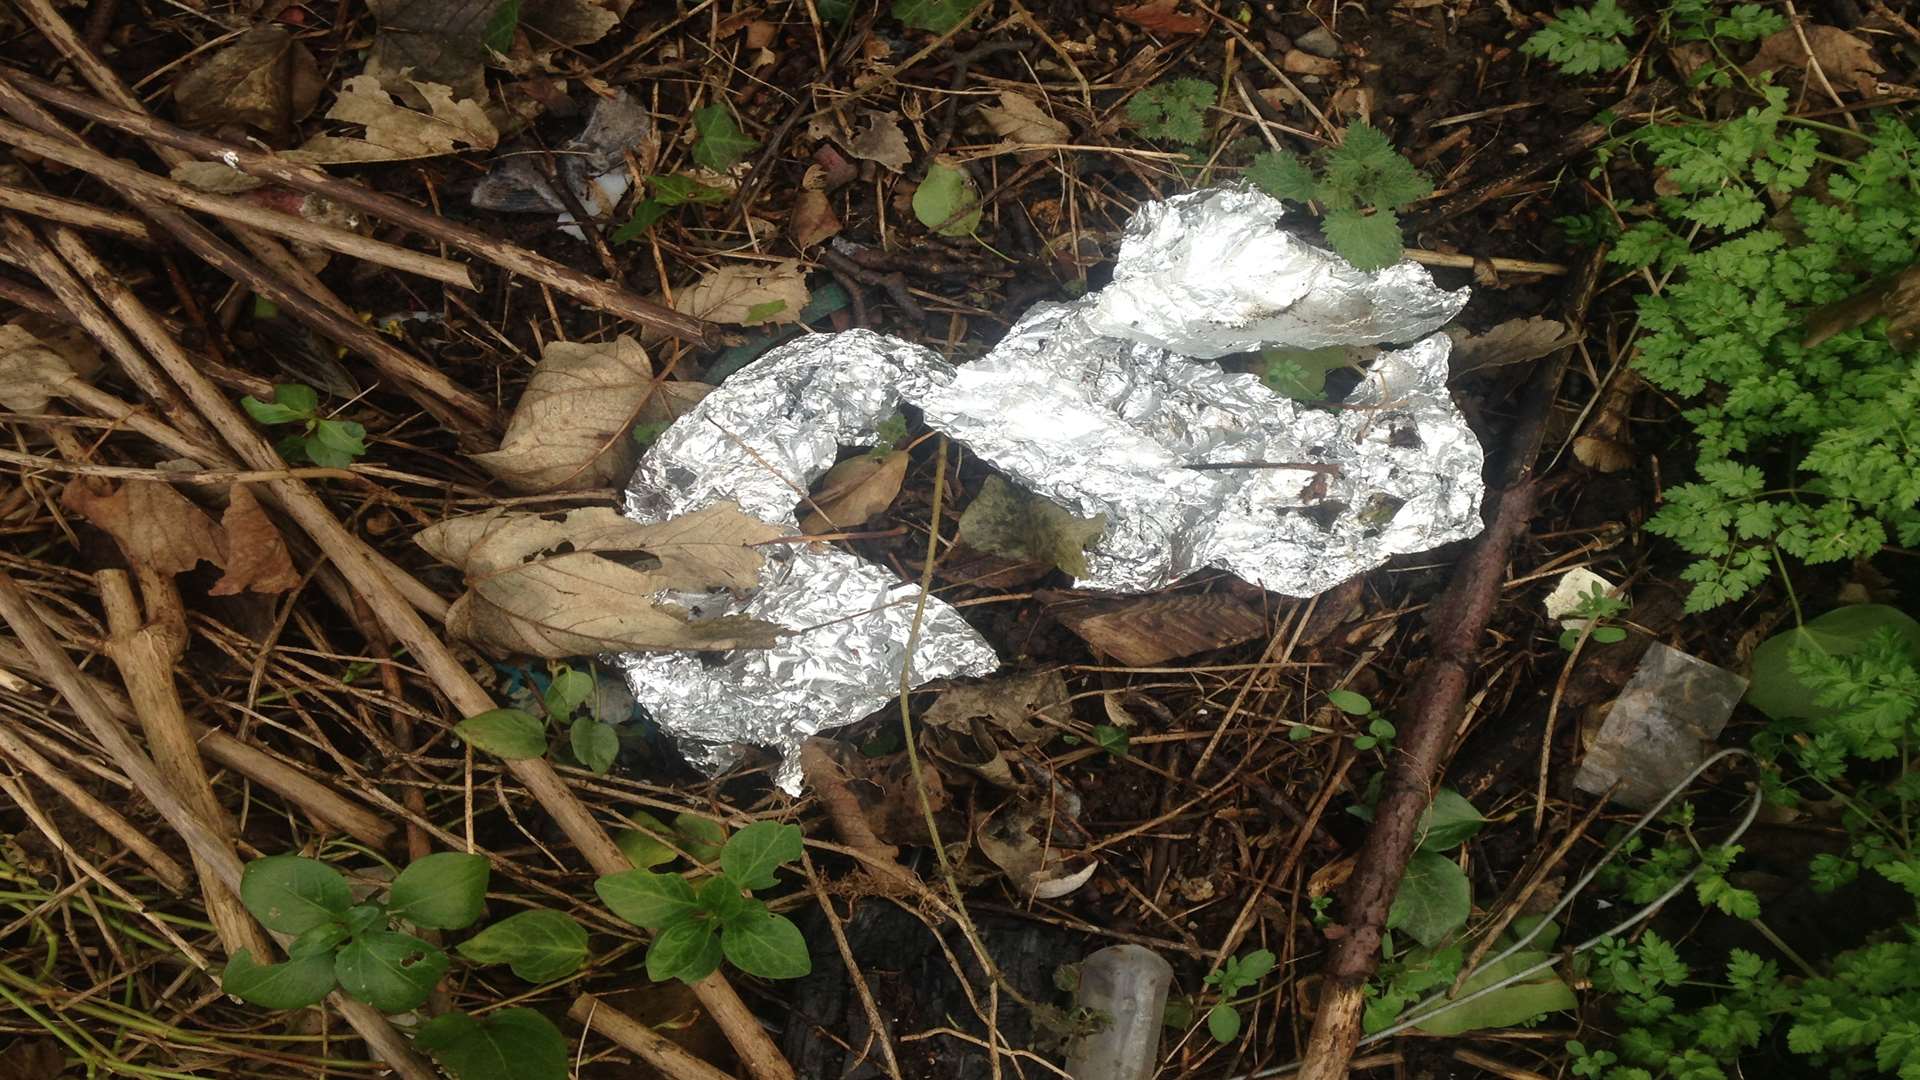 Drug paraphernalia has been found in wooded areas, usually used for dog walkers and an area for children to play